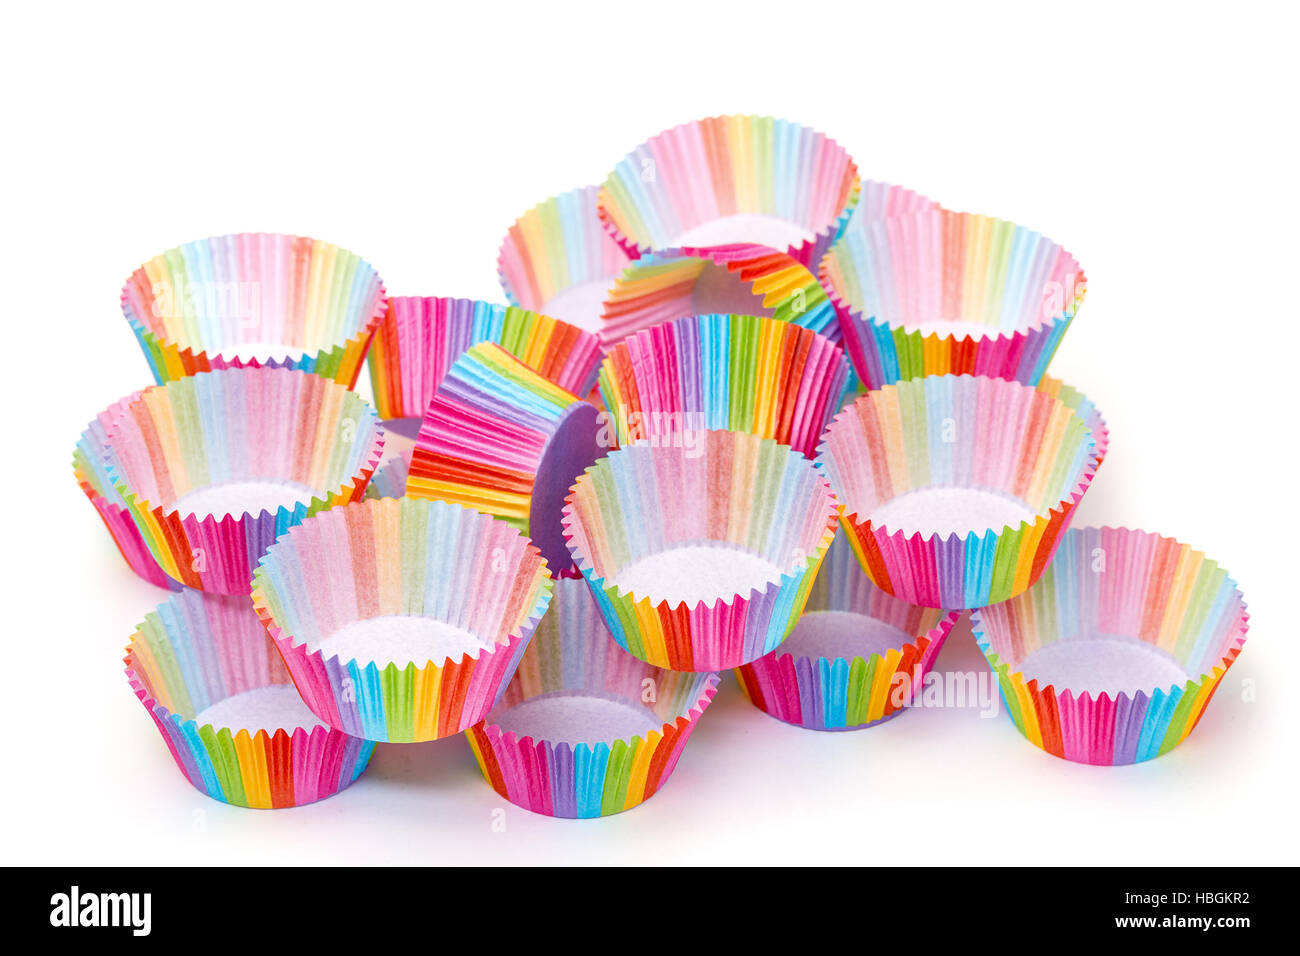 Colorful Papers Cup for Baking Cakes Stock Photo